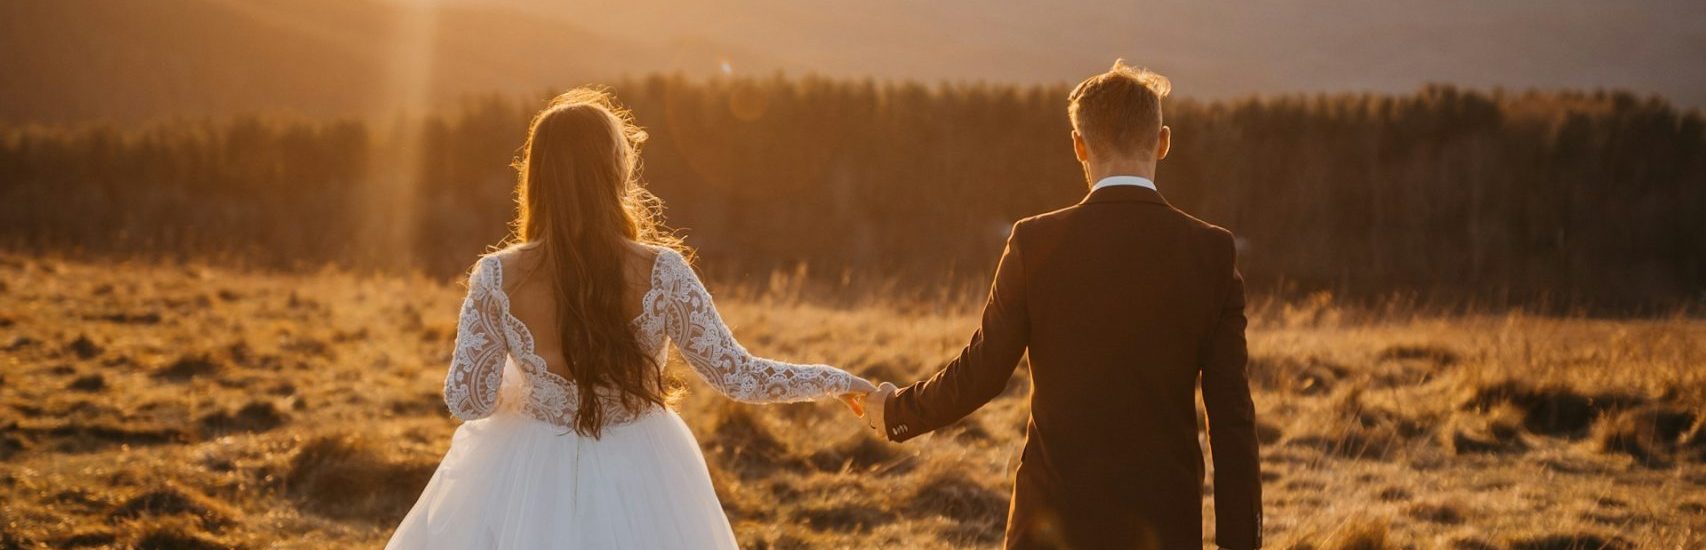 Marrying a Foreigner in Australia? Here is What You Need to Know